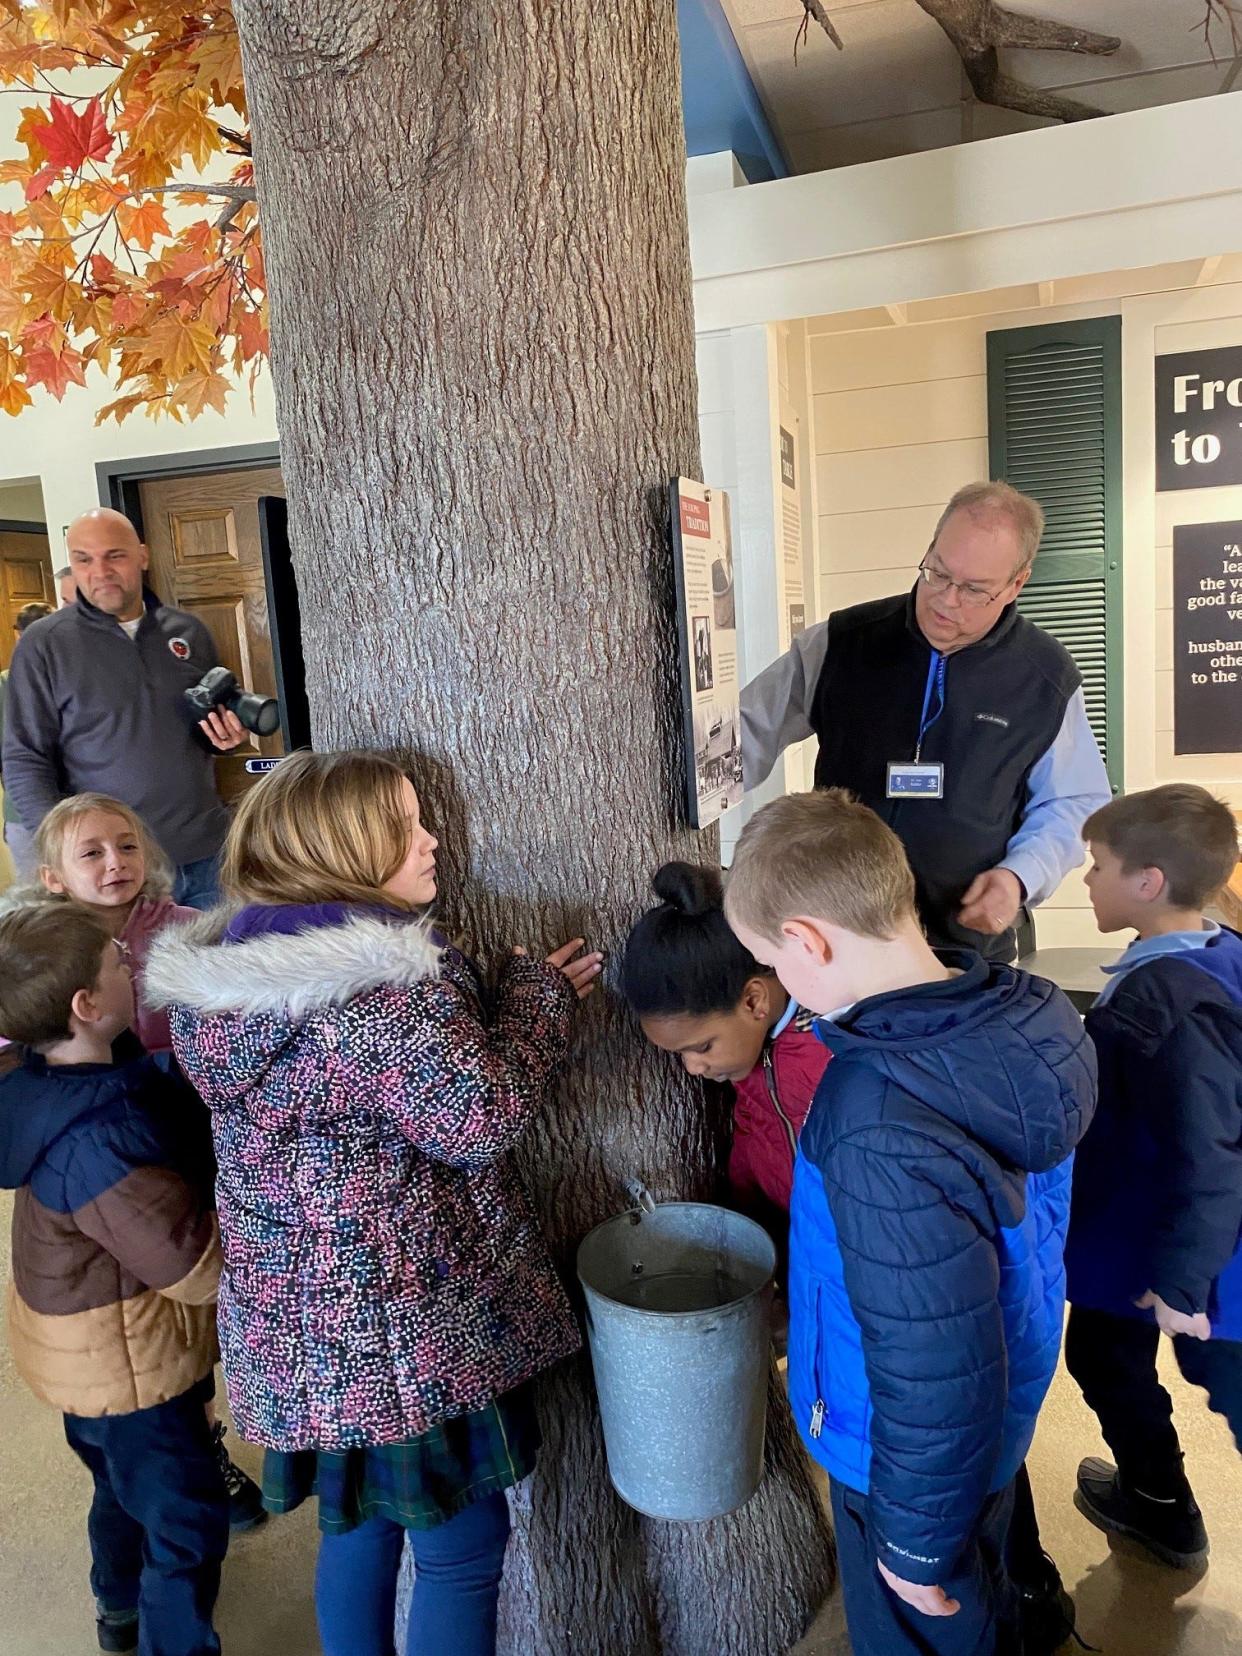 Students from St. Peter's School in Mansfield enjoyed the Malabar Farm State Park's new Visitor Center exhibit Tuesday at stations designed to educate about the farm at 4050 Bromfield Road in Lucas.